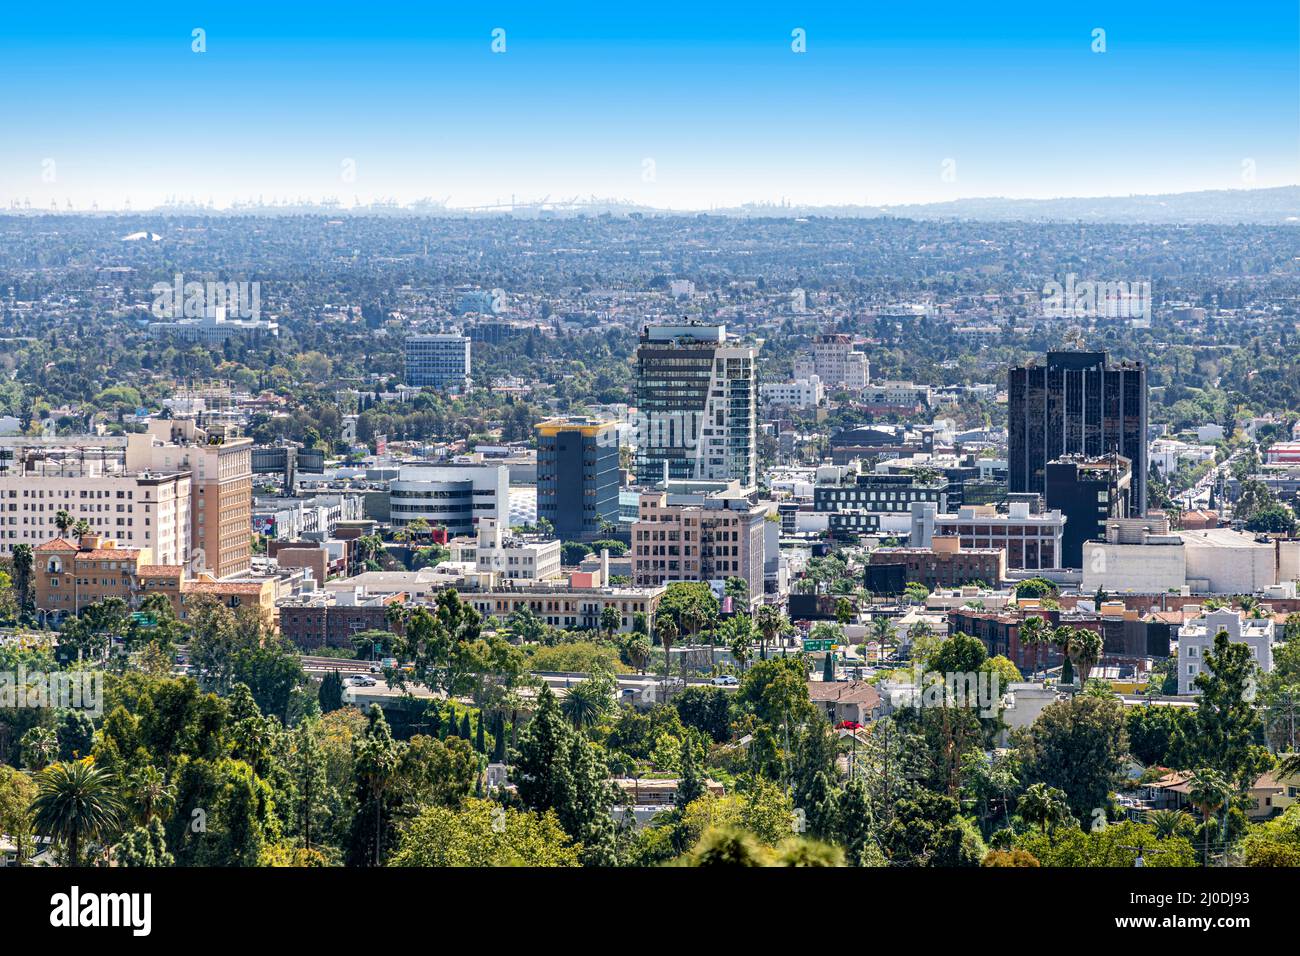 Downtown city view of Santa Monica as seen from the Hollywood Reservoir dam during a beautiful, bright day. Stock Photo